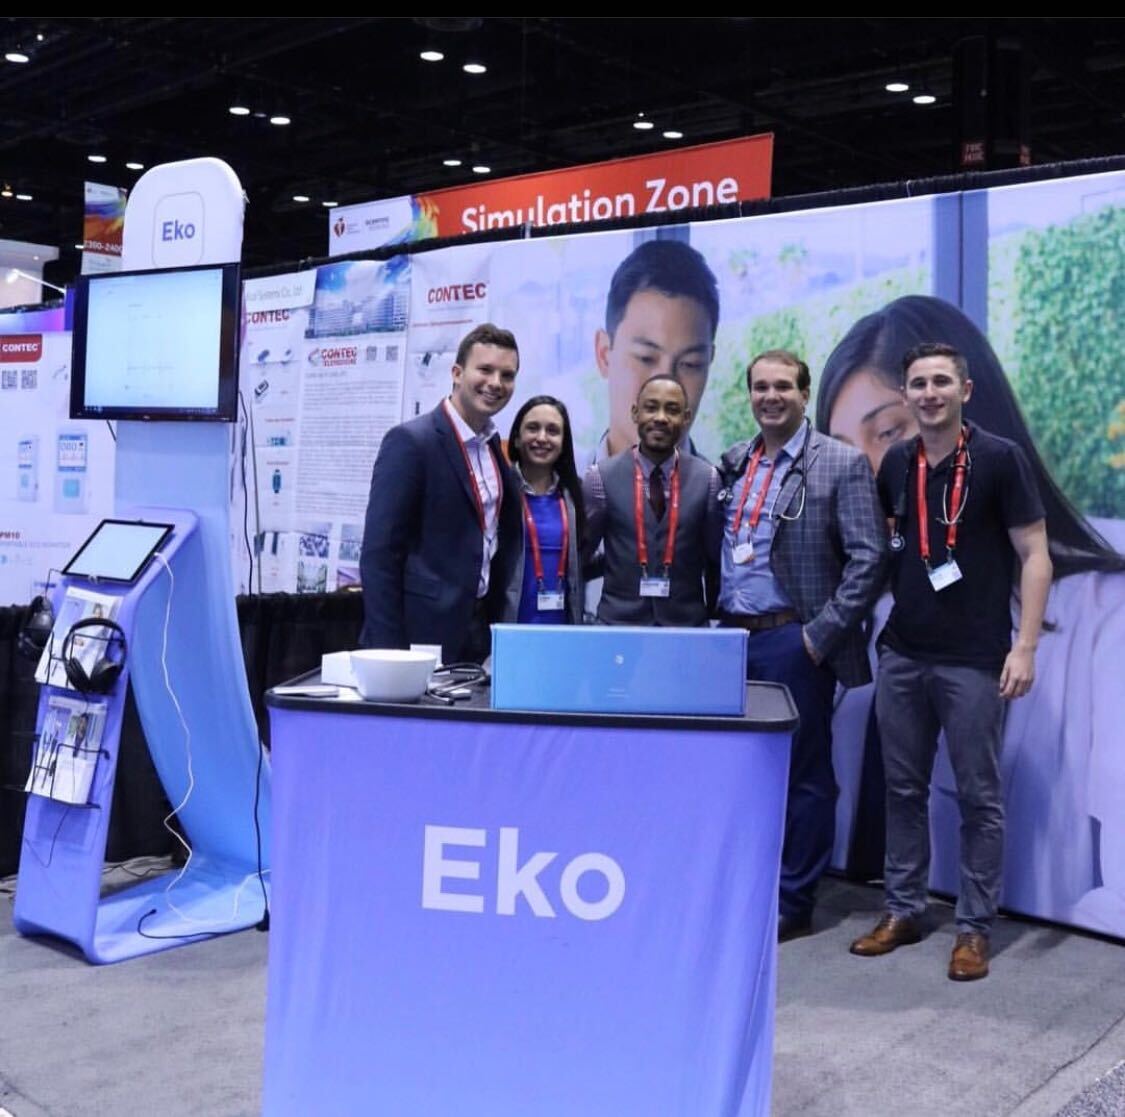 Eko booth at a conference